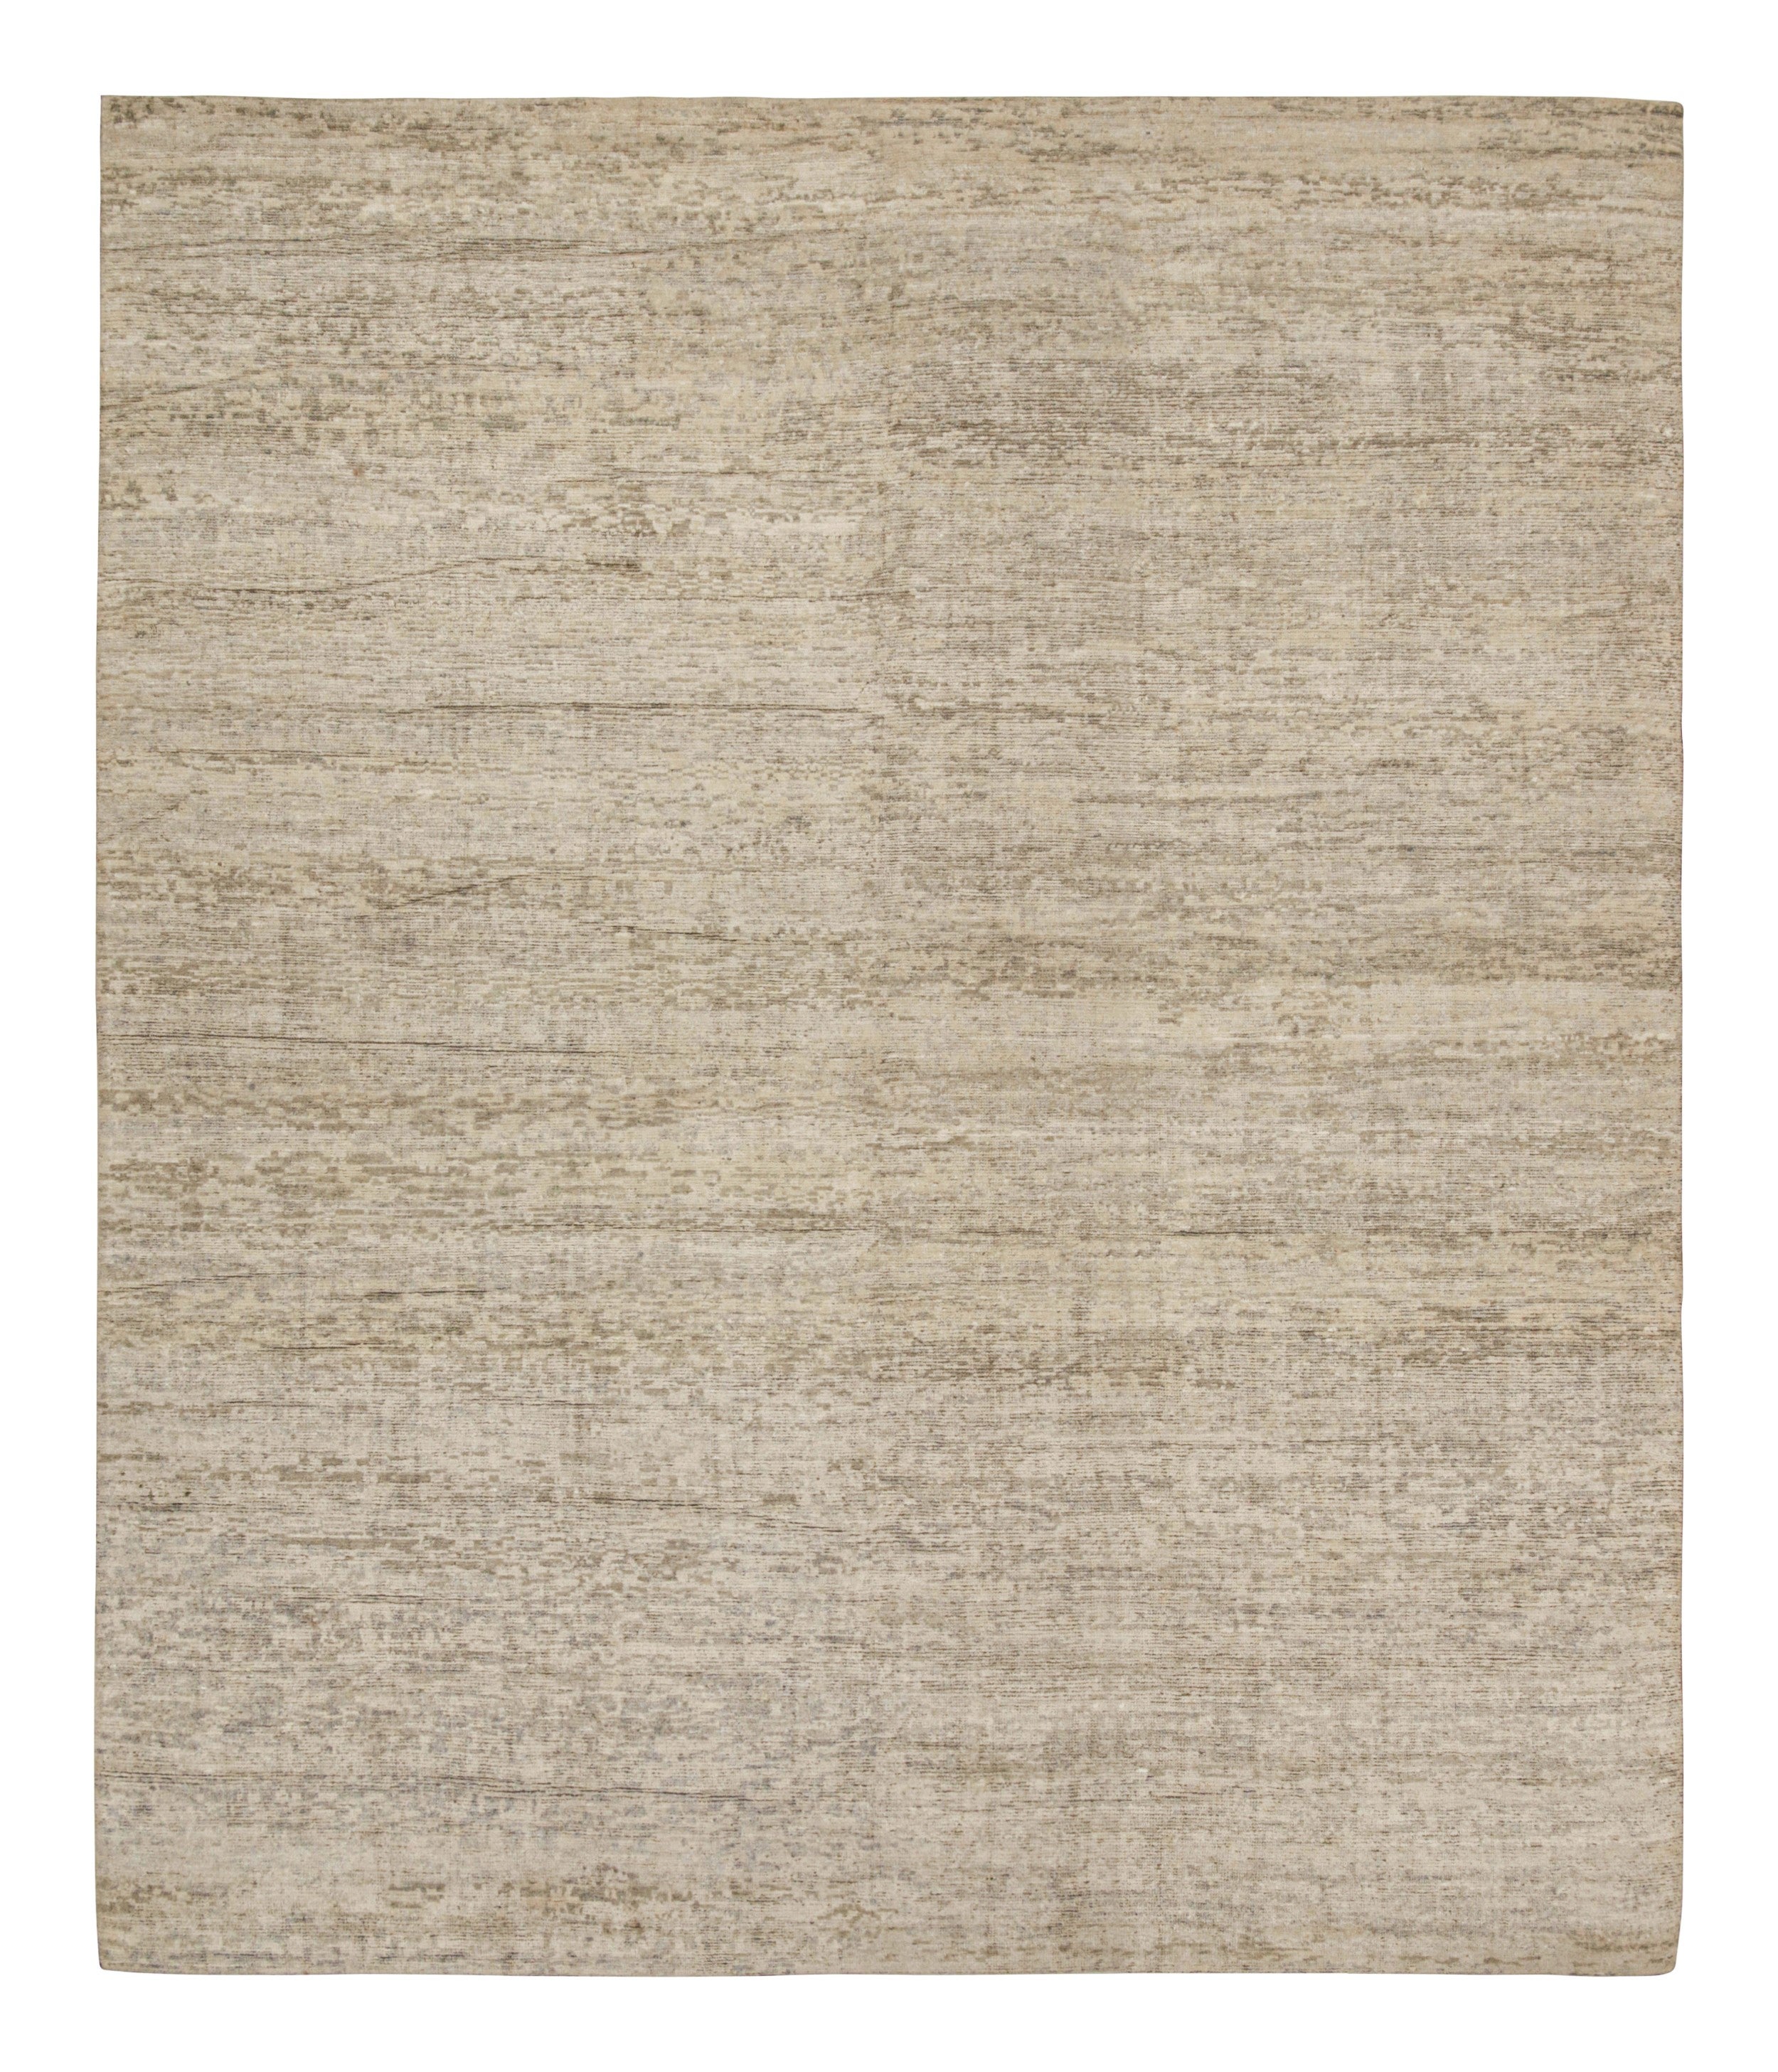 This contemporary 15x18 rug is a new addition to Rug & Kilim’s Texture of Color Collection. Hand-knotted in wool and silk, its design explores a bold take on plain rugs with a minimalist design in neutral tones.

This rug can be cut and resized to